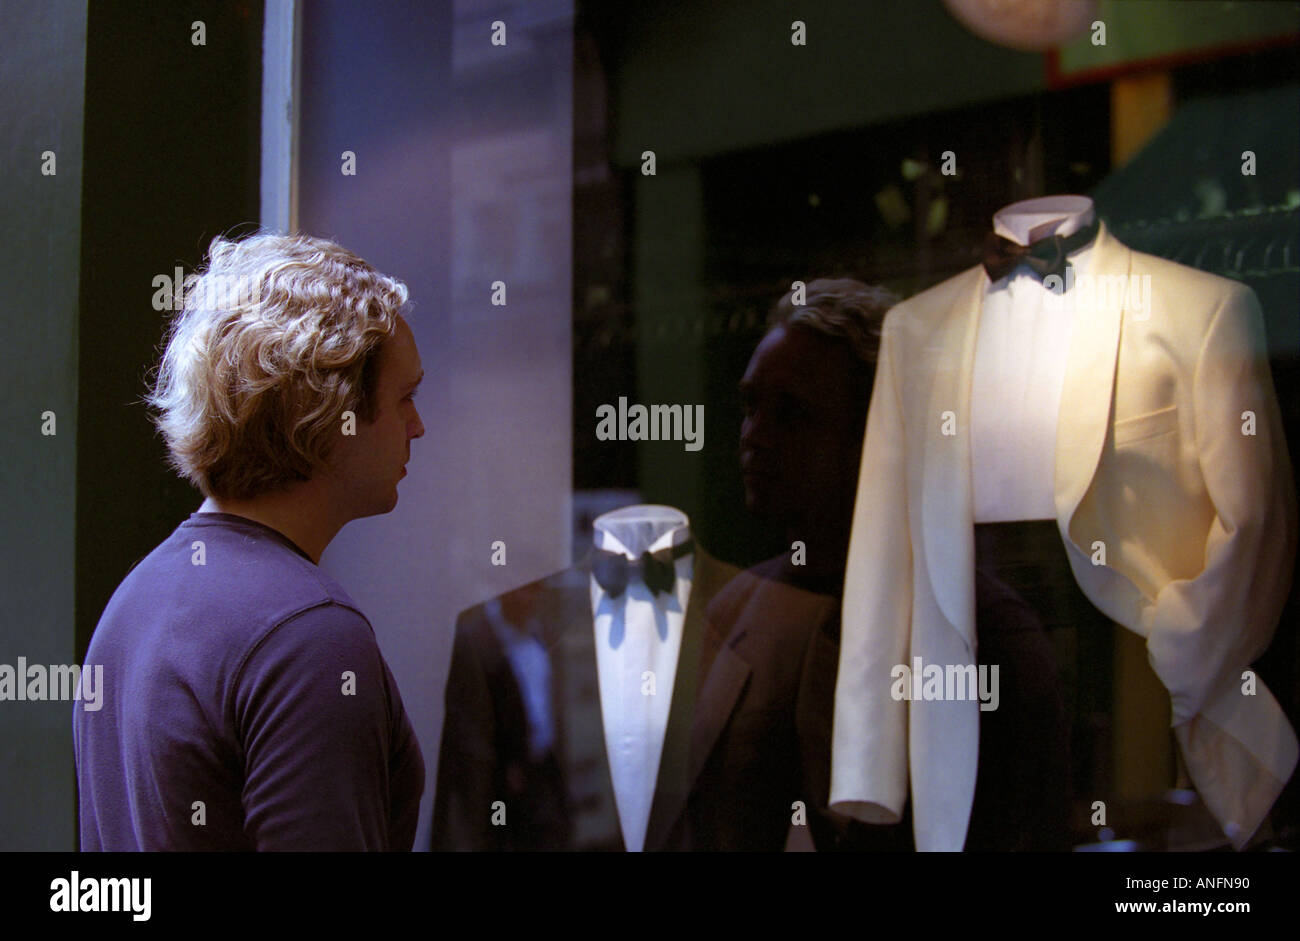 Scruffy man looking at dinner jackets in shop window Stock Photo